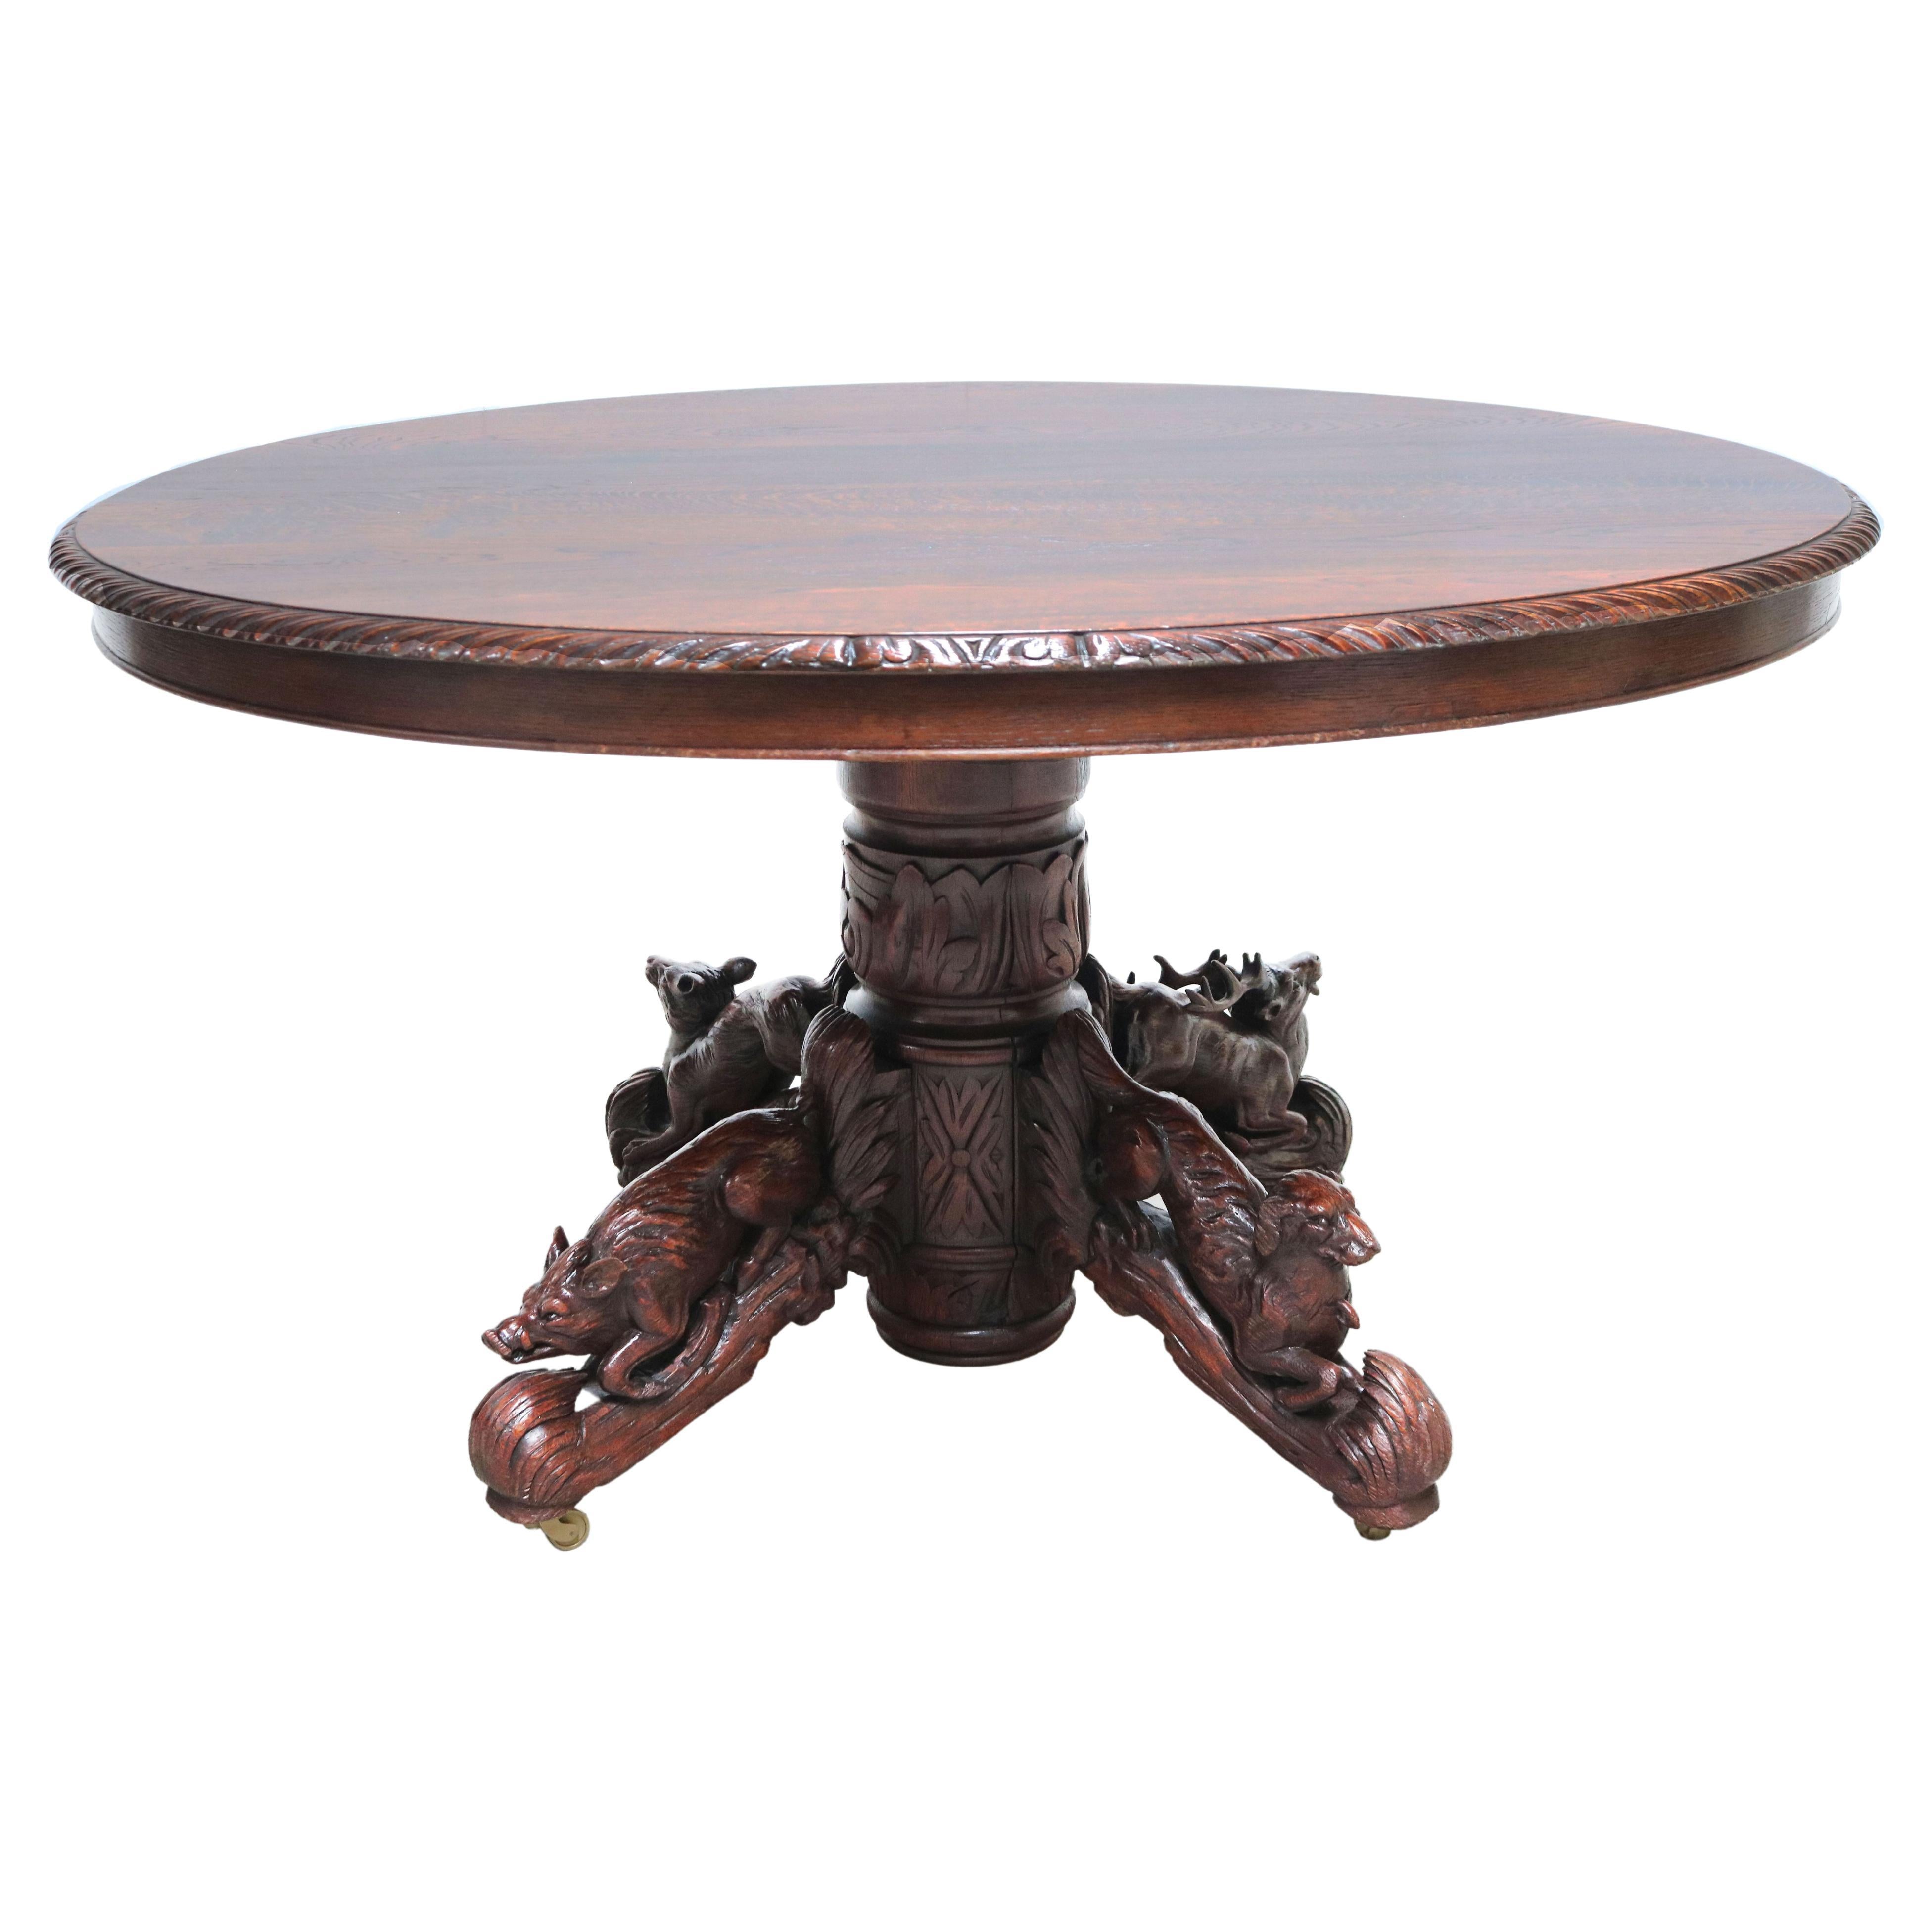 19th Century French Antique Oak Oval Dining Hunt Table Black Forest Animal Lodge